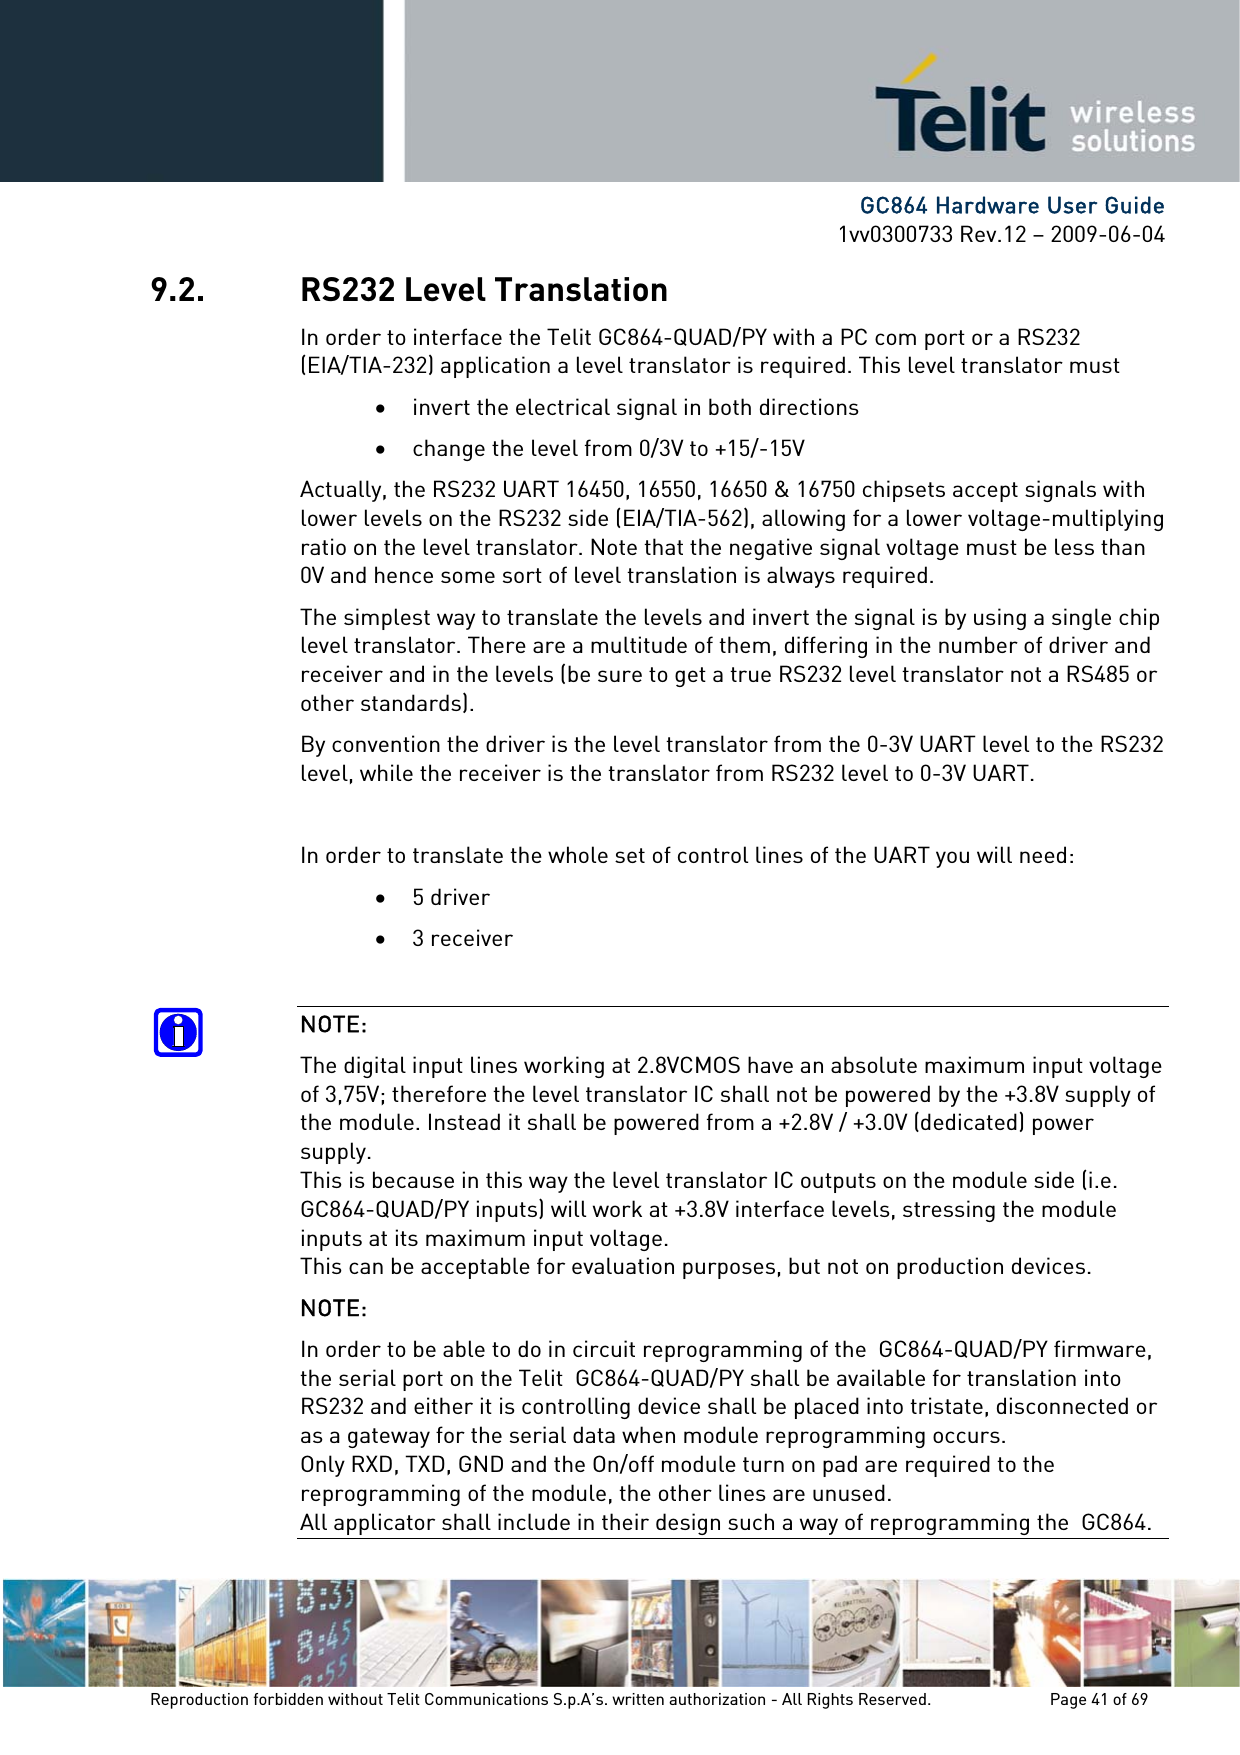      GC864 Hardware User Guide 1vv0300733 Rev.12 – 2009-06-04 9.2. RS232 Level Translation In order to interface the Telit GC864-QUAD/PY with a PC com port or a RS232 (EIA/TIA-232) application a level translator is required. This level translator must • invert the electrical signal in both directions • change the level from 0/3V to +15/-15V Actually, the RS232 UART 16450, 16550, 16650 &amp; 16750 chipsets accept signals with lower levels on the RS232 side (EIA/TIA-562), allowing for a lower voltage-multiplying ratio on the level translator. Note that the negative signal voltage must be less than 0V and hence some sort of level translation is always required.  The simplest way to translate the levels and invert the signal is by using a single chip level translator. There are a multitude of them, differing in the number of driver and receiver and in the levels (be sure to get a true RS232 level translator not a RS485 or other standards). By convention the driver is the level translator from the 0-3V UART level to the RS232 level, while the receiver is the translator from RS232 level to 0-3V UART.  In order to translate the whole set of control lines of the UART you will need: • 5 driver • 3 receiver  NOTE: The digital input lines working at 2.8VCMOS have an absolute maximum input voltage of 3,75V; therefore the level translator IC shall not be powered by the +3.8V supply of the module. Instead it shall be powered from a +2.8V / +3.0V (dedicated) power supply. This is because in this way the level translator IC outputs on the module side (i.e.  GC864-QUAD/PY inputs) will work at +3.8V interface levels, stressing the module inputs at its maximum input voltage. This can be acceptable for evaluation purposes, but not on production devices. NOTE: In order to be able to do in circuit reprogramming of the  GC864-QUAD/PY firmware, the serial port on the Telit  GC864-QUAD/PY shall be available for translation into RS232 and either it is controlling device shall be placed into tristate, disconnected or as a gateway for the serial data when module reprogramming occurs. Only RXD, TXD, GND and the On/off module turn on pad are required to the reprogramming of the module, the other lines are unused. All applicator shall include in their design such a way of reprogramming the  GC864. Reproduction forbidden without Telit Communications S.p.A’s. written authorization - All Rights Reserved.    Page 41 of 69  